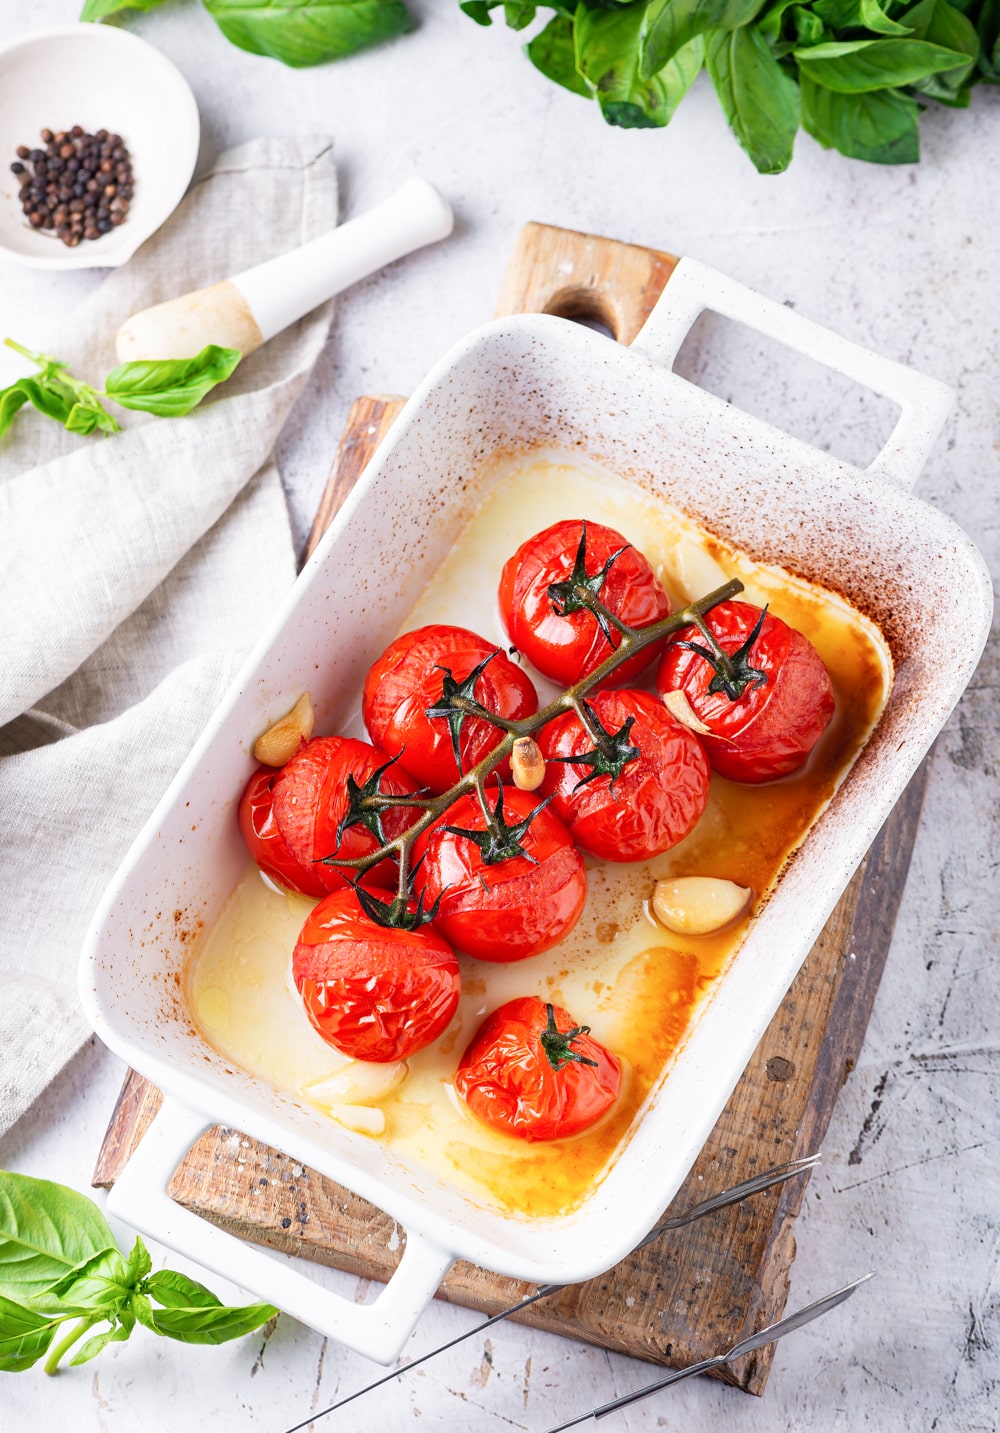 Tomato and garlic cooked in a white baking dish.